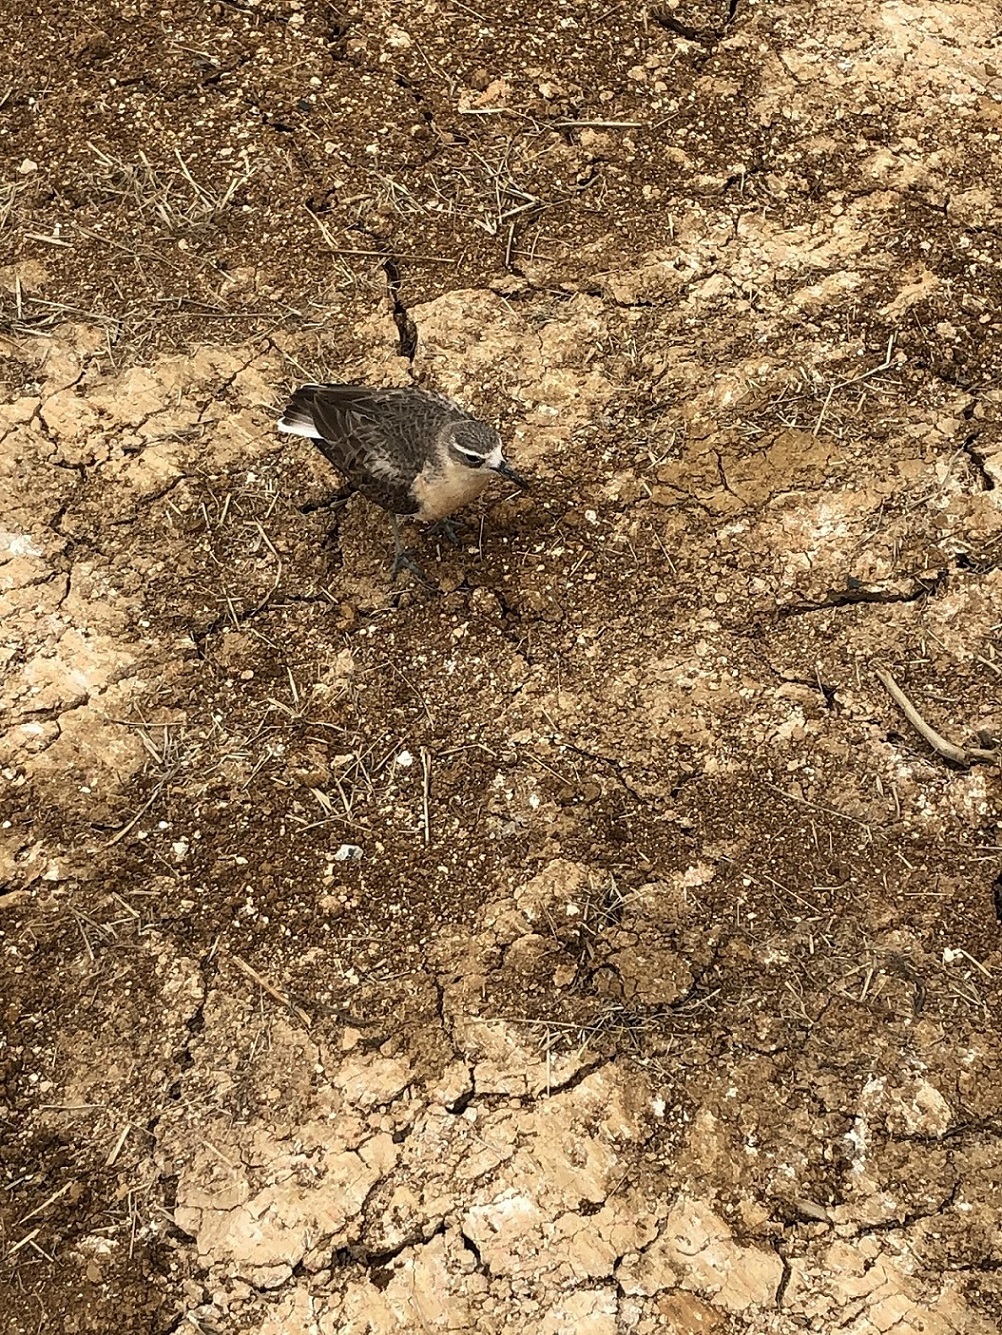 A dotterel is on the building site. Photo courtesy of HEB Construction Ltd.